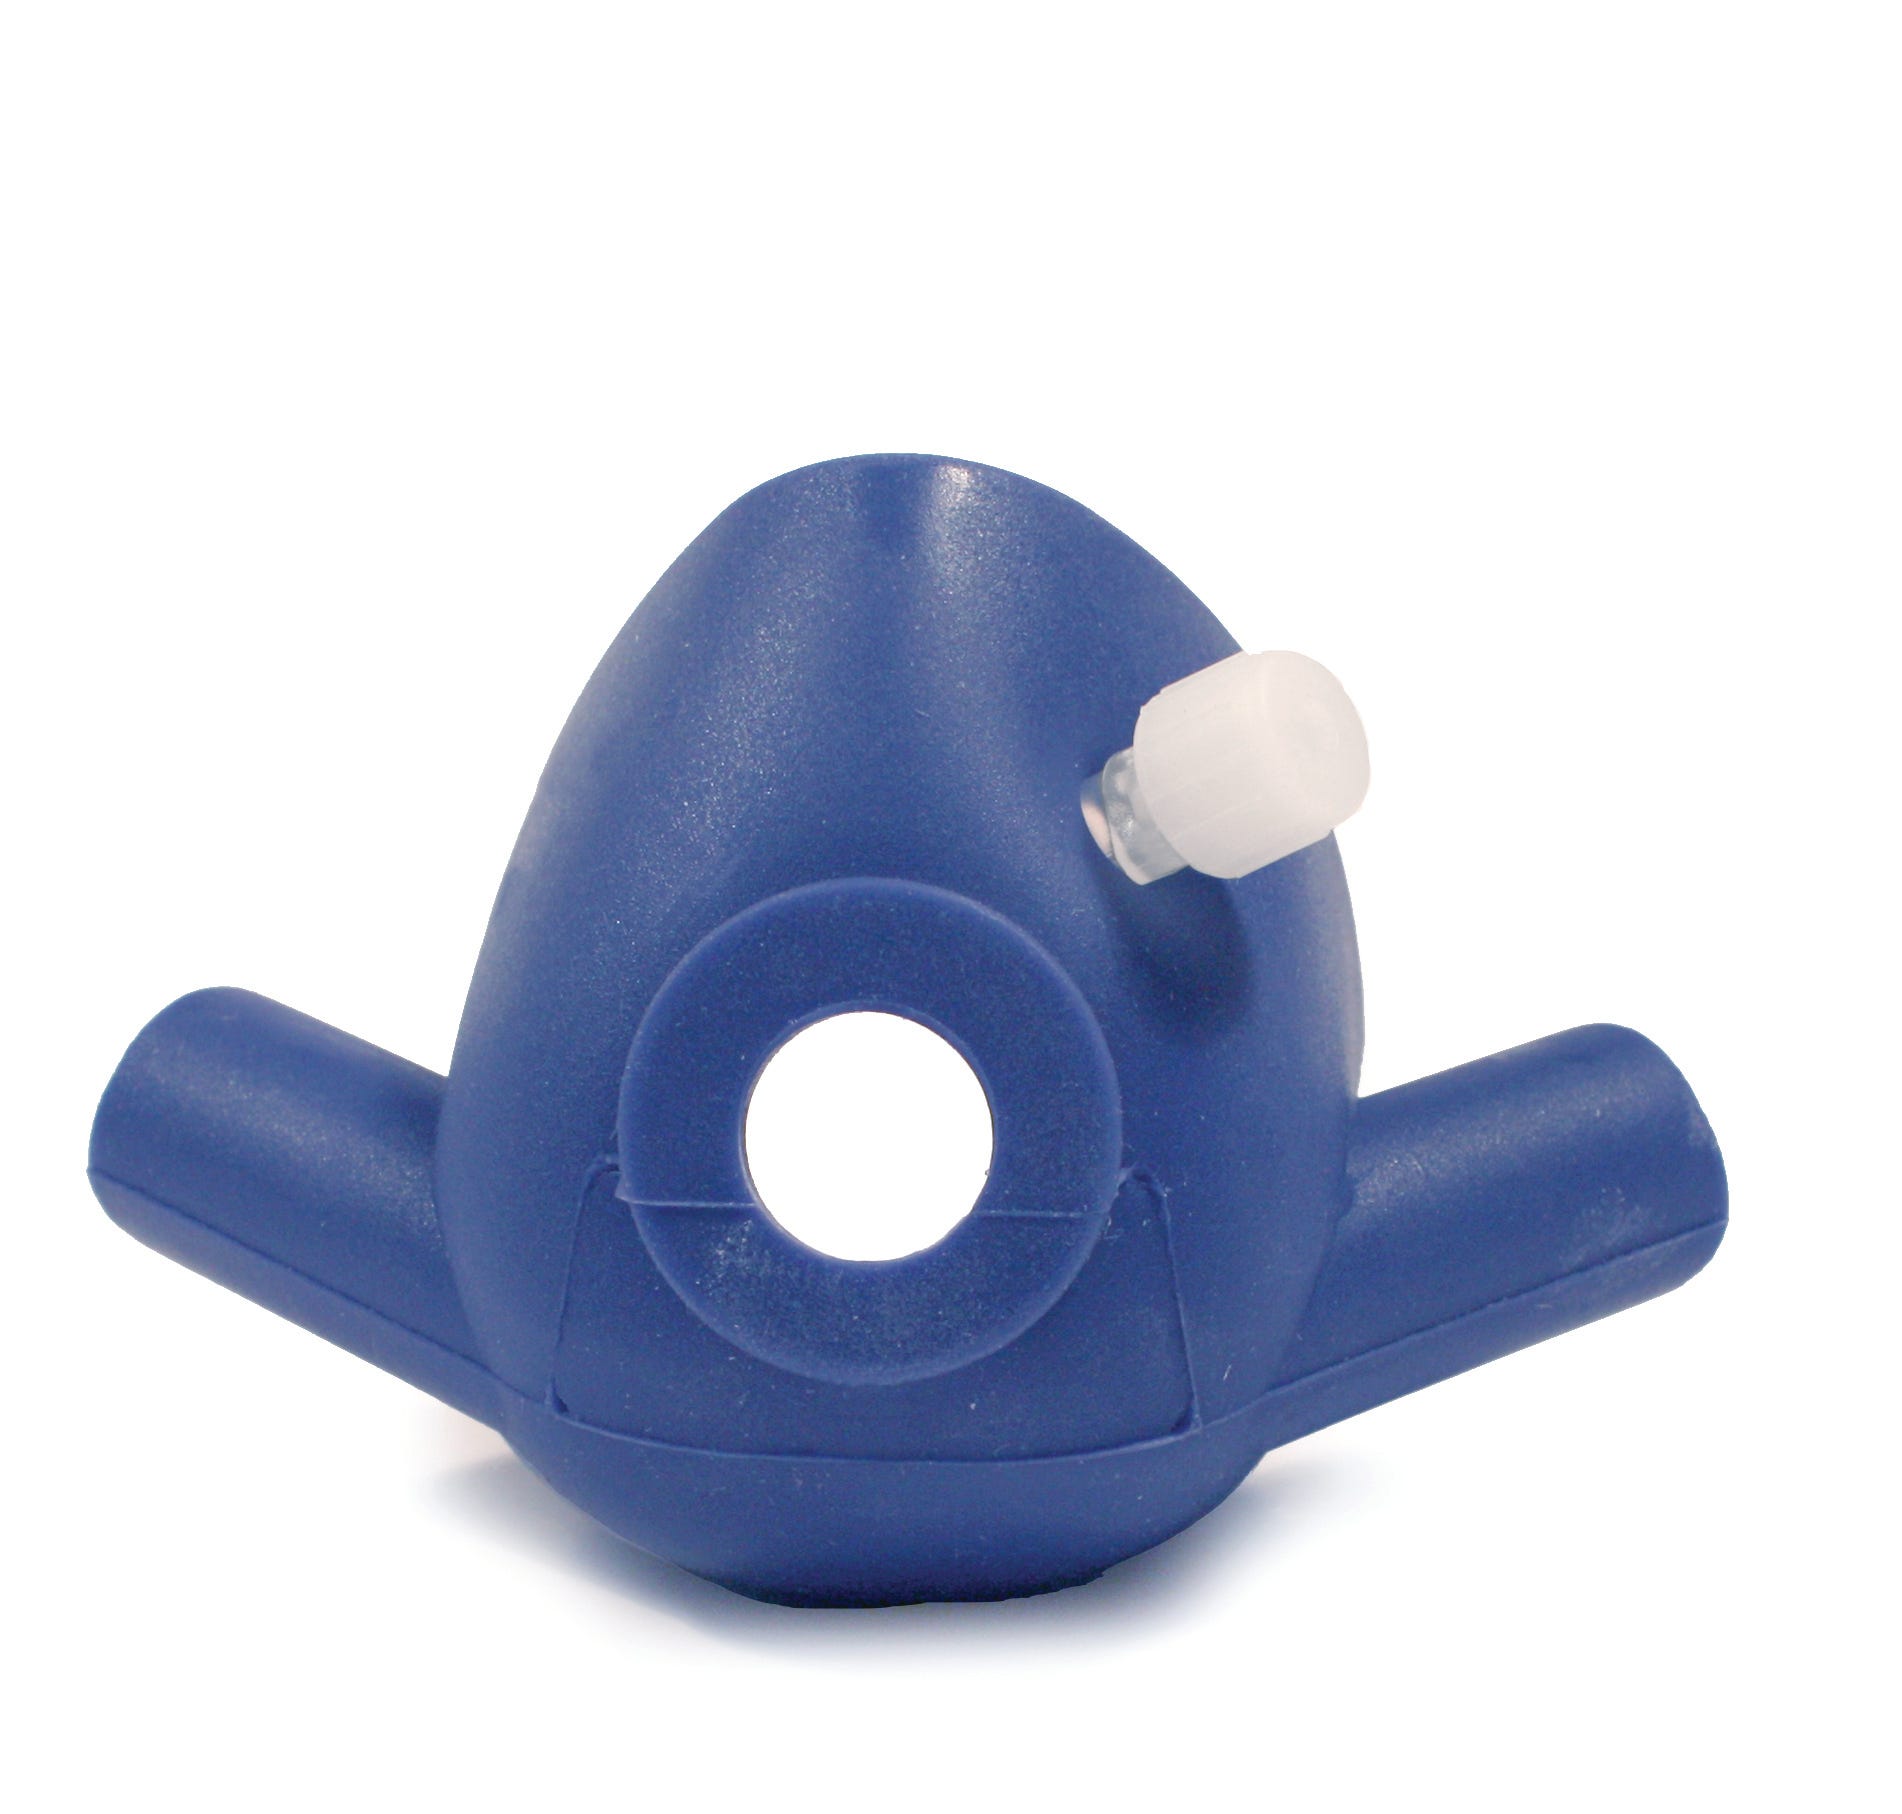 Prepunched Autoclavable Nasal Hoods with Luer Lock Connection, Blue, Small, 3/Pkg